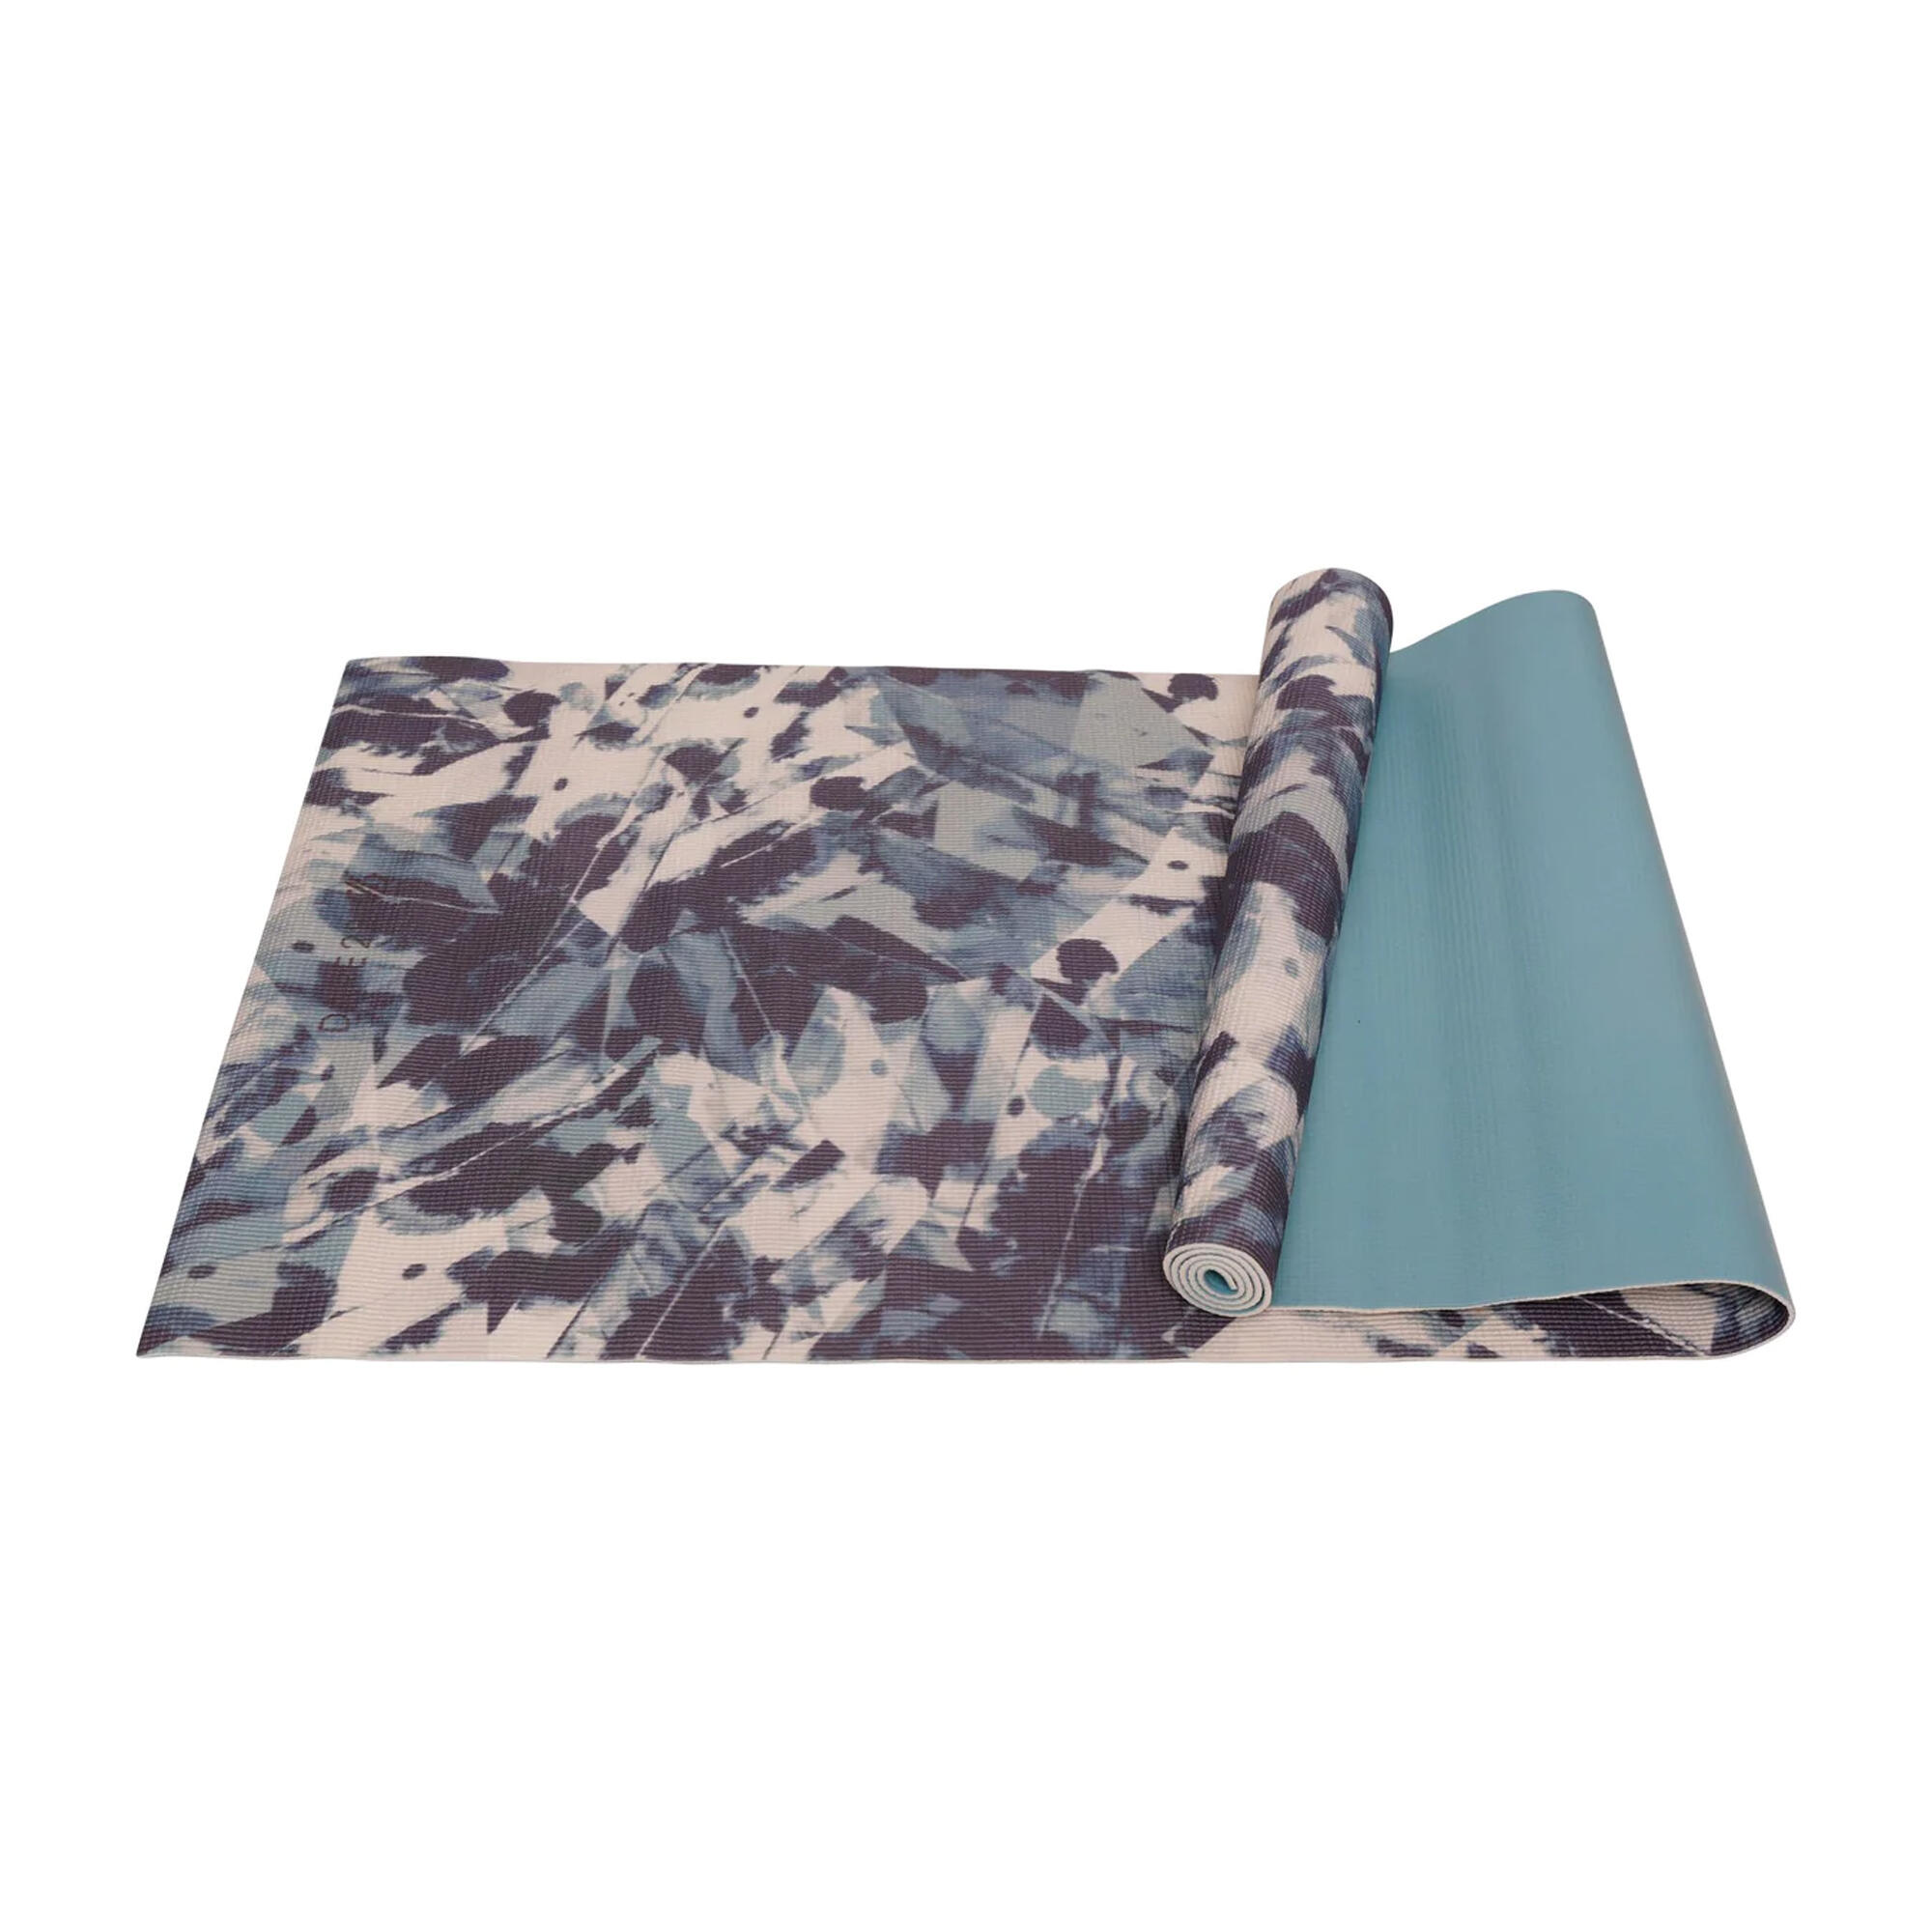 Abstract Fitness Yoga Mat (Dragonfly Ink) 3/4